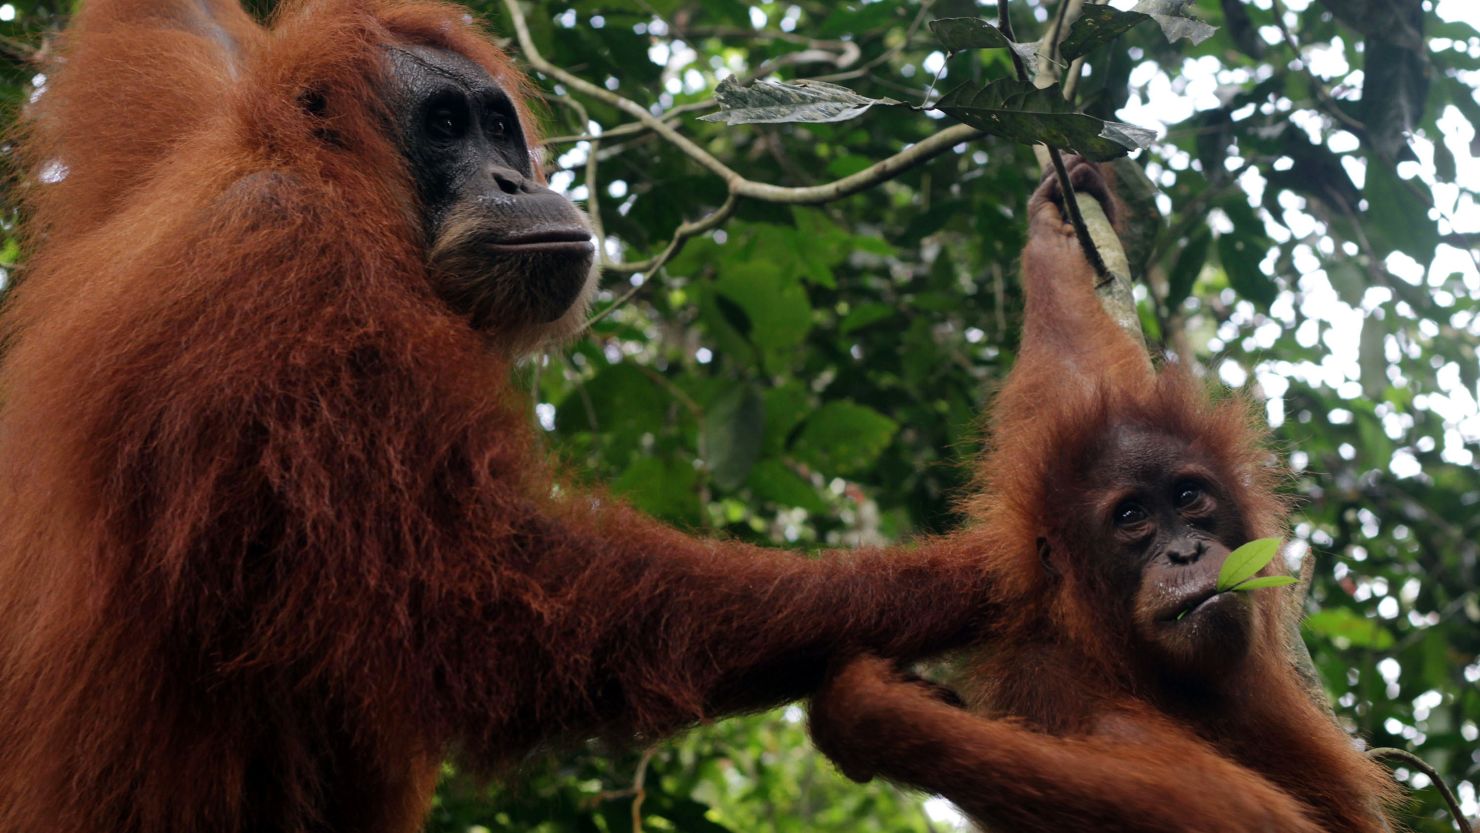 Orangutan feces analyzed  in Malaysia found the animals could be 'stressed'